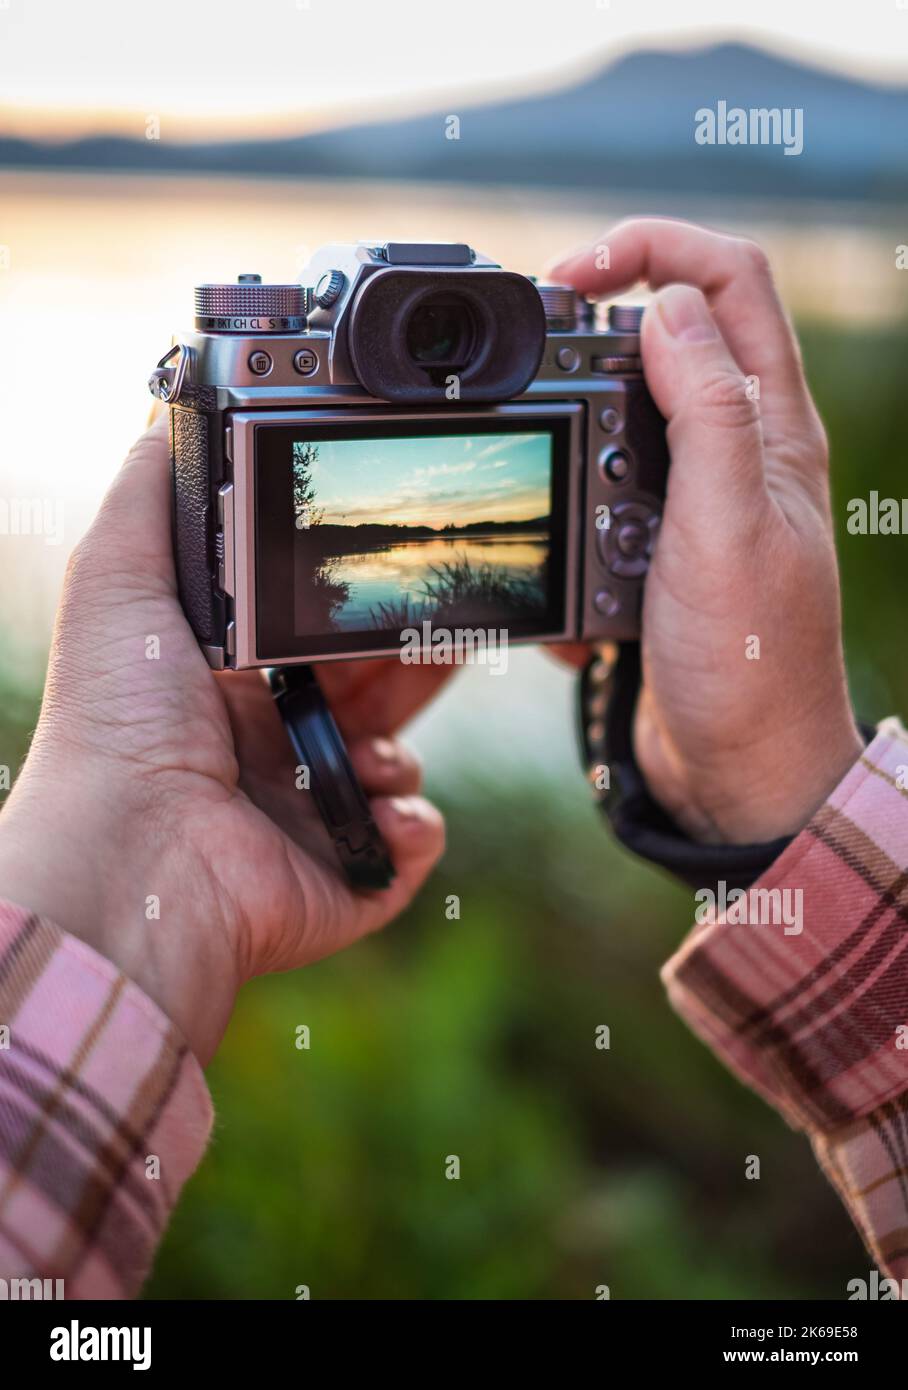 Hand holding a mirrorless digital camera prepare for take a landscape photo. Hands taking photo of sunset with camera mirrorless. Hand grap camera Stock Photo